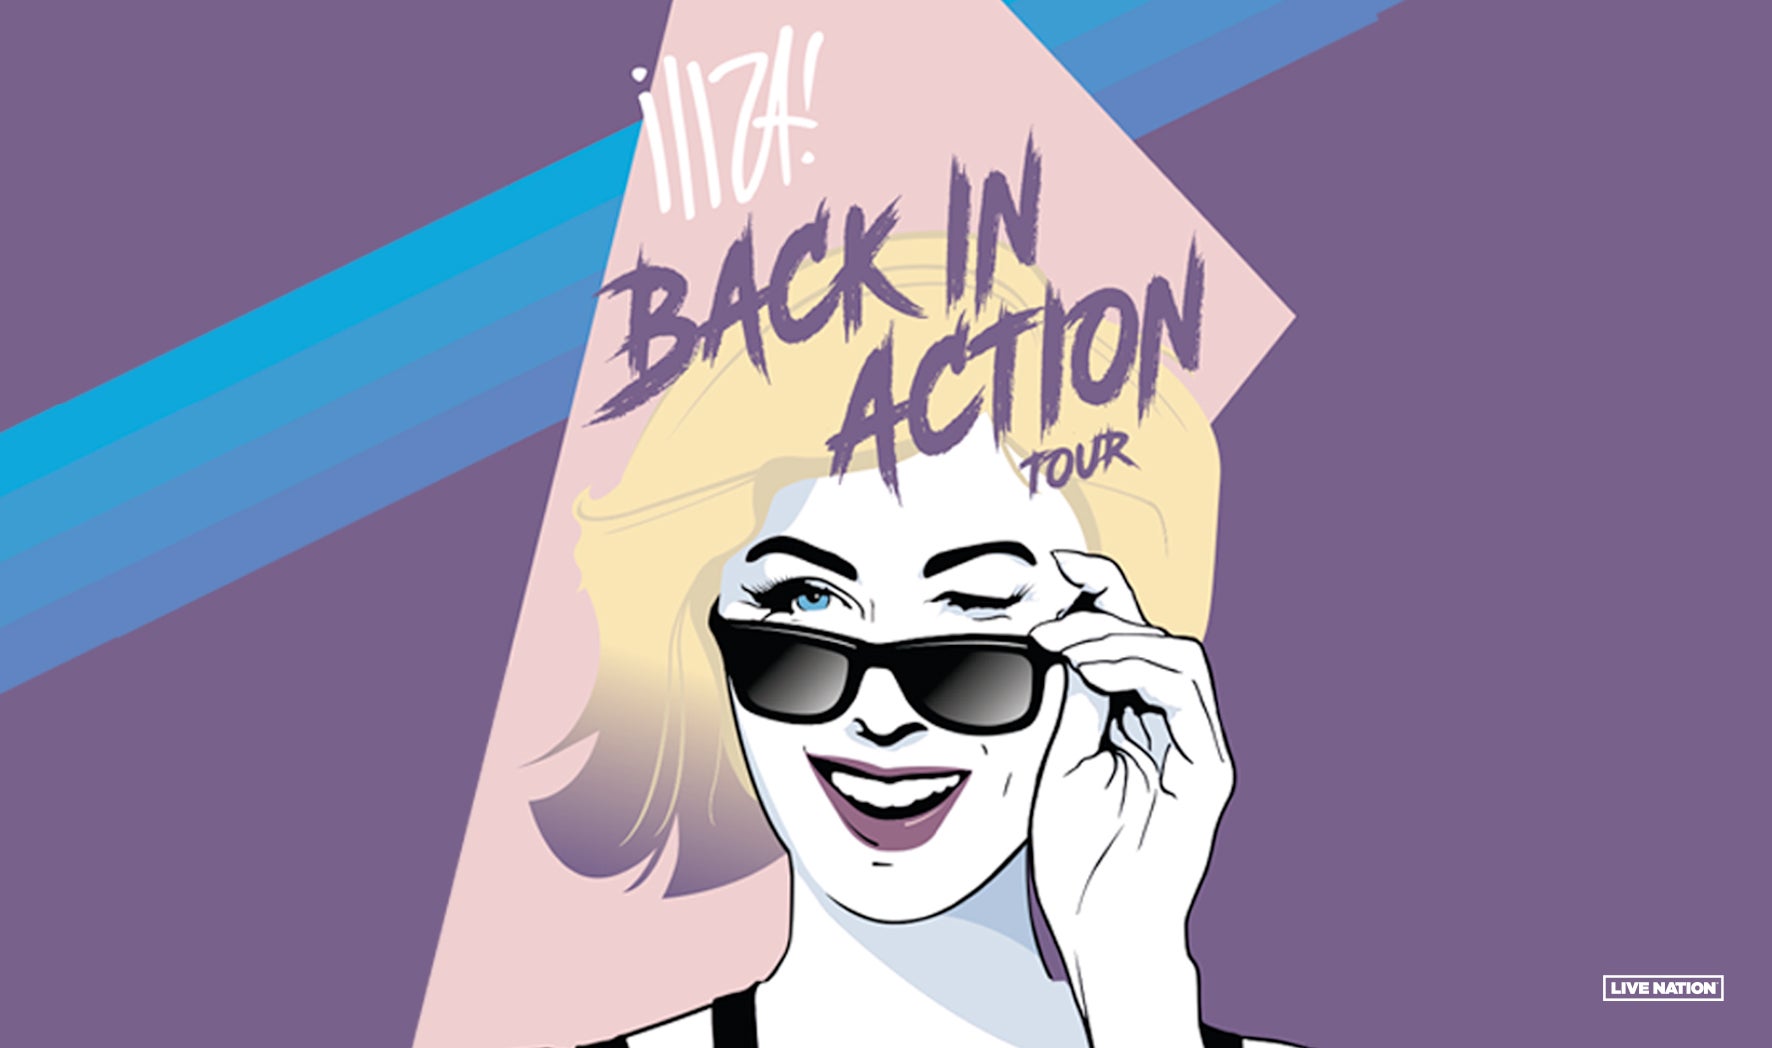 More Info for Iliza: Back In Action Tour